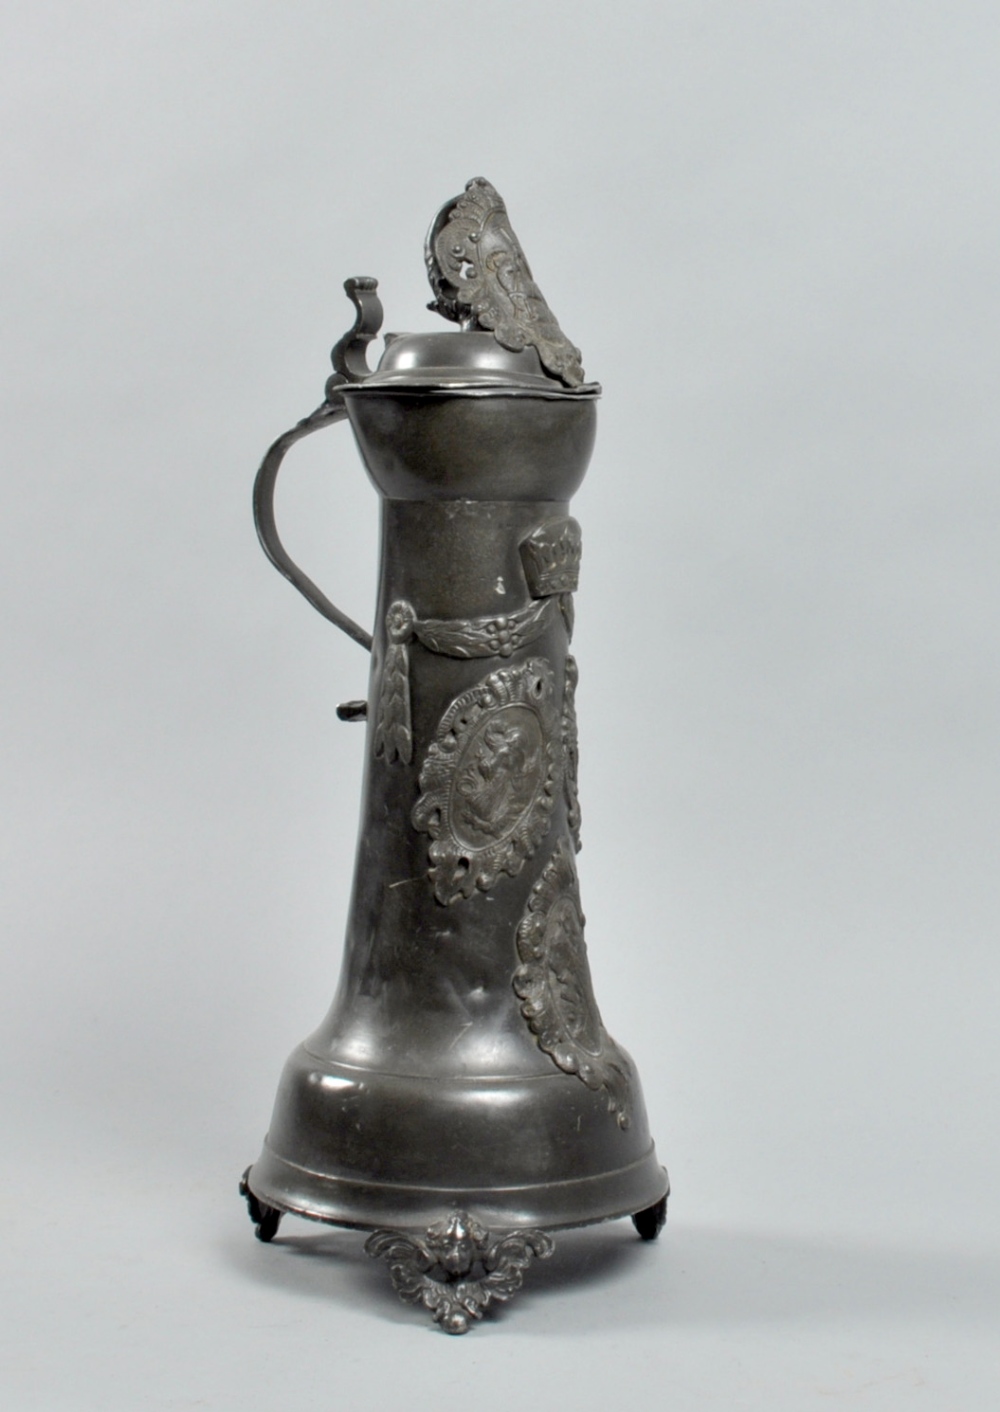 A 19c German pewter flagon decorated with heraldic crests, swag and crown, having a hinged domed